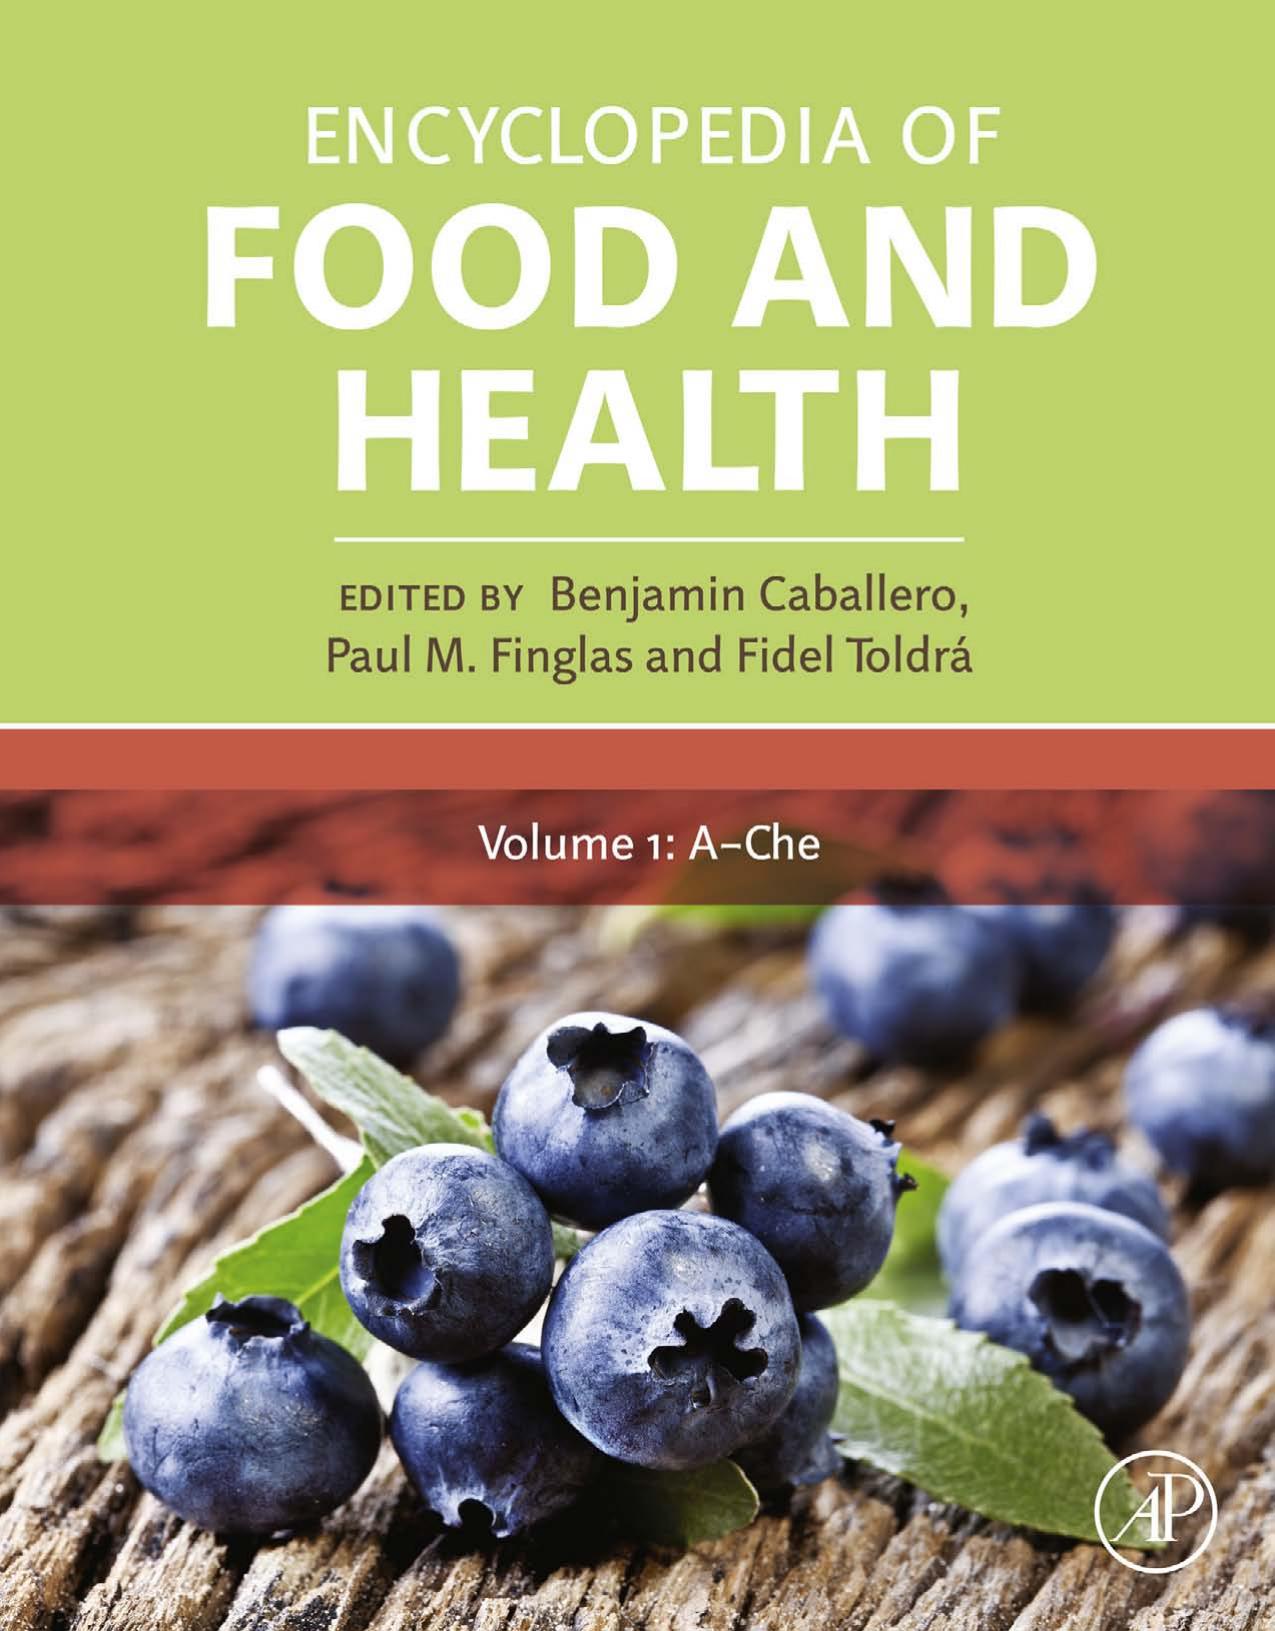 Encyclopedia of Food and Health